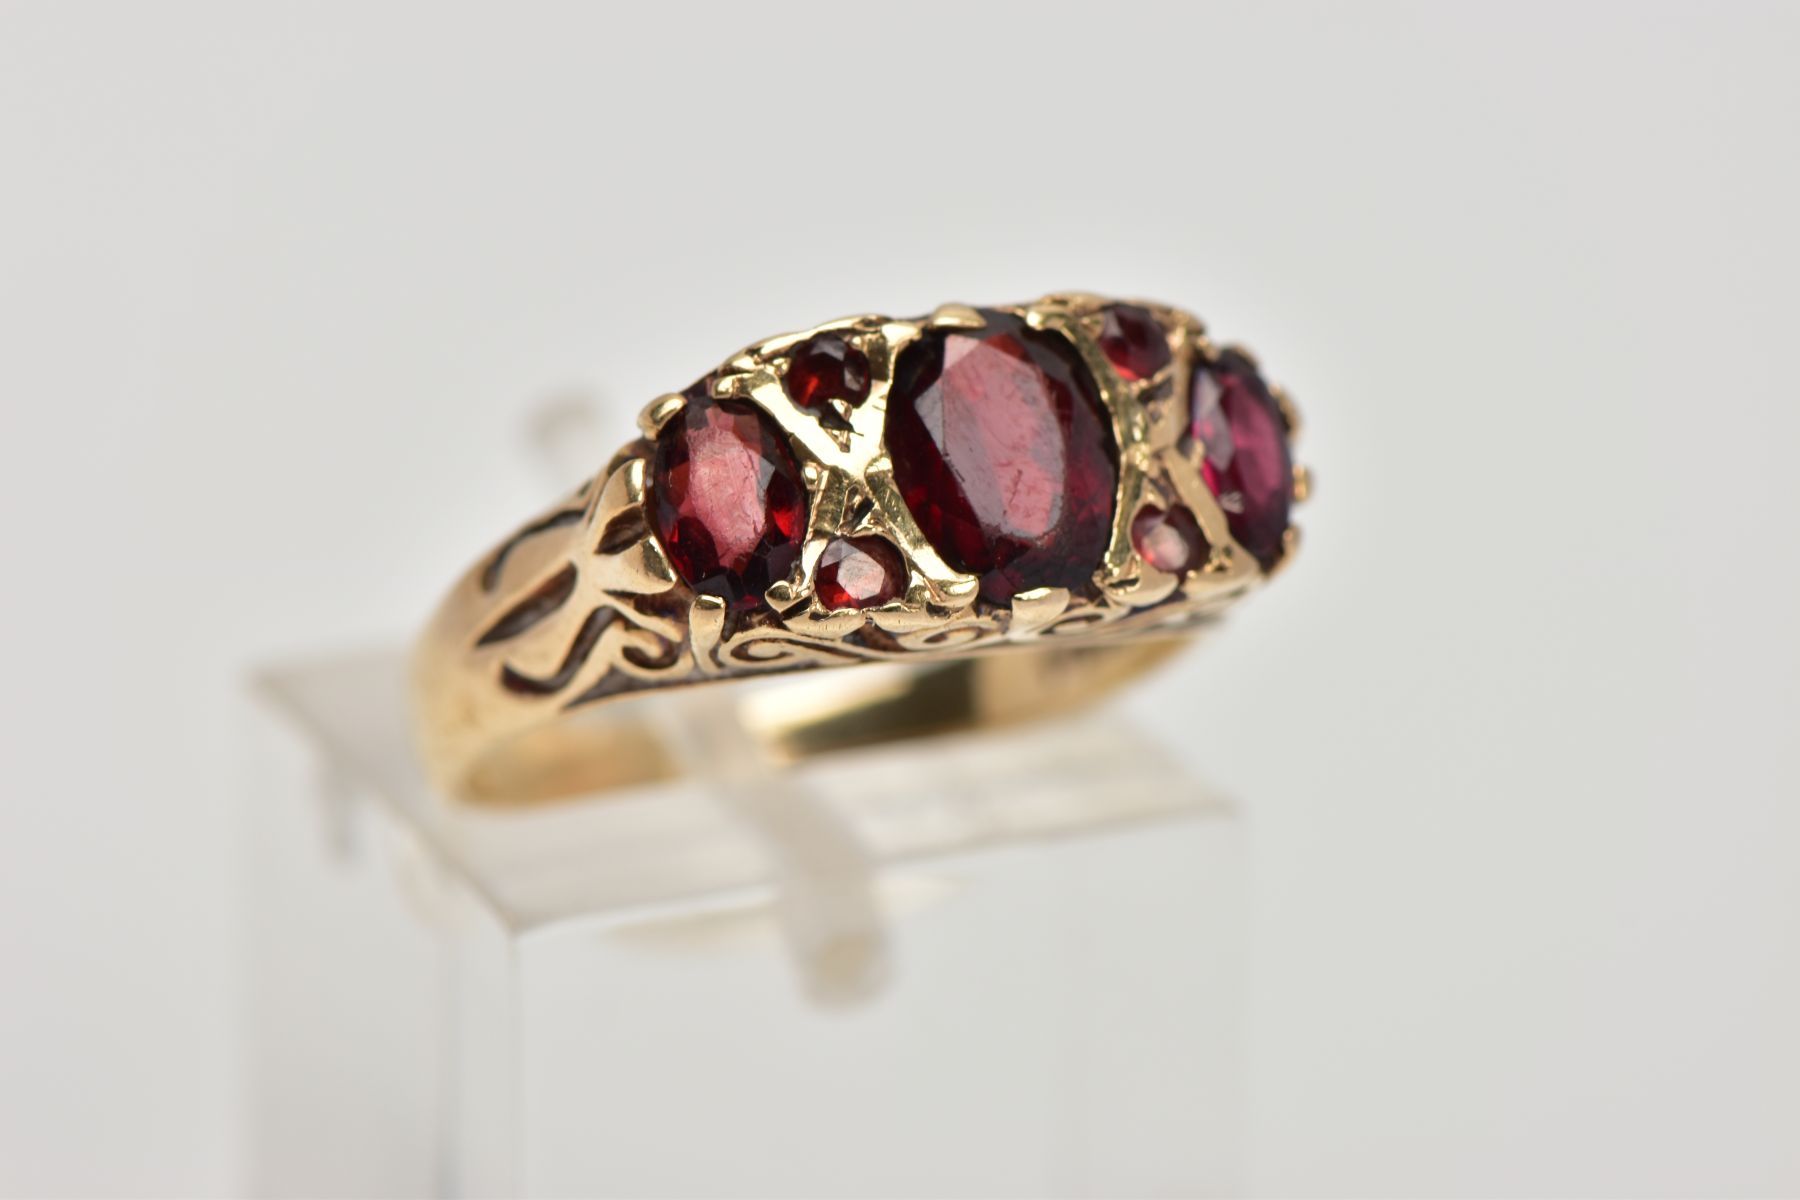 A 9CT GOLD THREE STONE GARNET RING, designed with a row of three graduated oval cut garnets, - Image 4 of 4